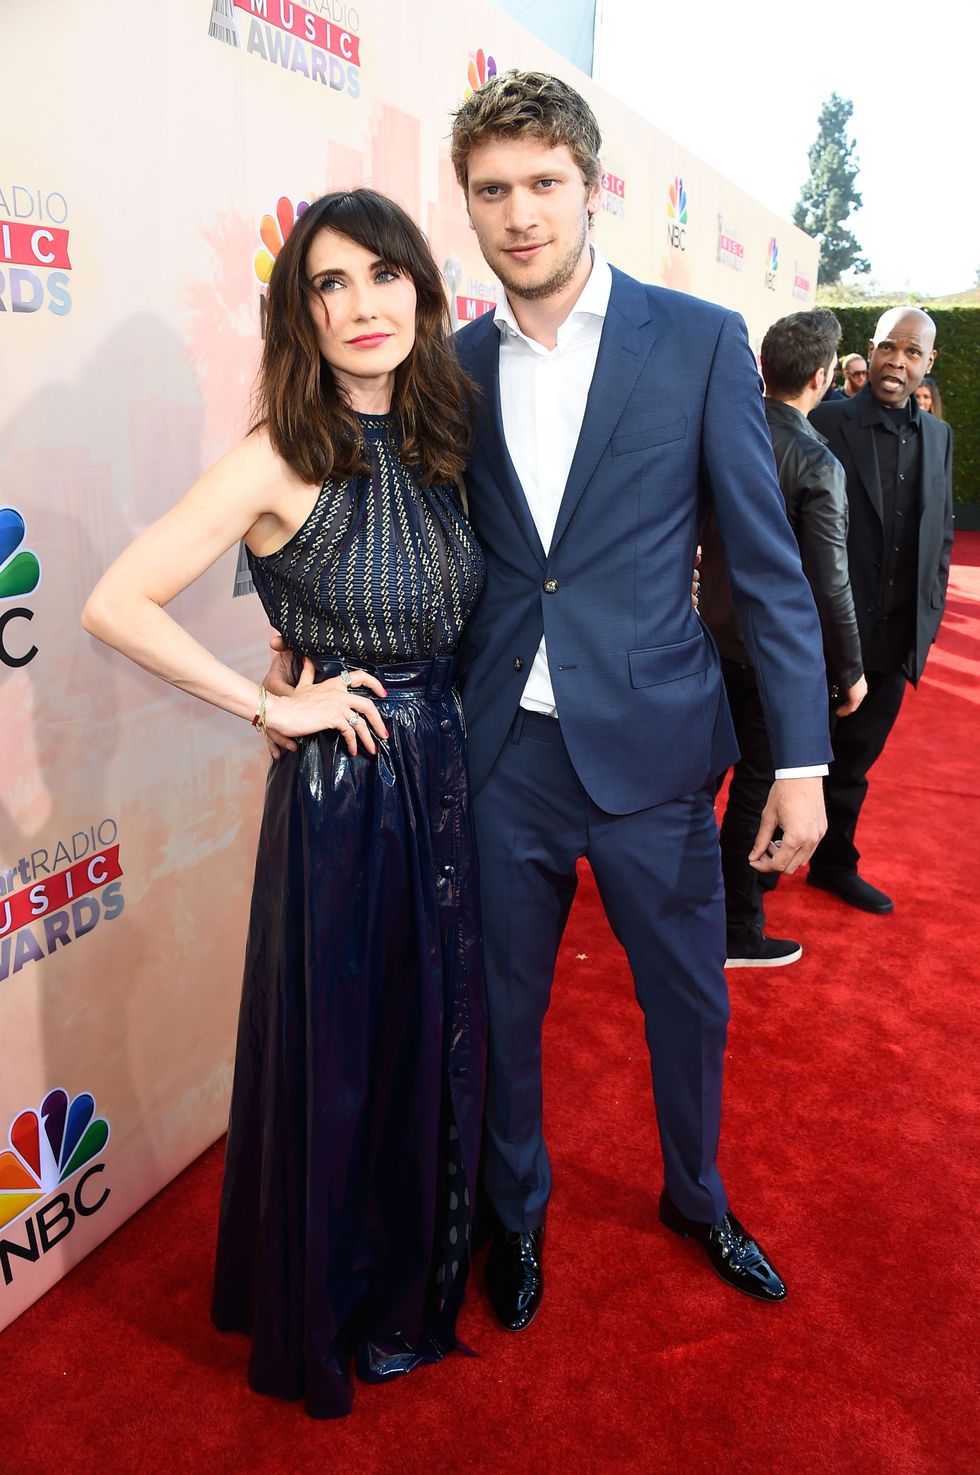 LOS ANGELES, CA - MARCH 29:  Actress Carice van Houten (L) and Kees van Nieuwkerk attend the 2015 iHeartRadio Music Awards which broadcasted live on NBC from The Shrine Auditorium on March 29, 2015 in Los Angeles, California.  (Photo by Frazer Harrison/Getty Images for iHeartMedia)